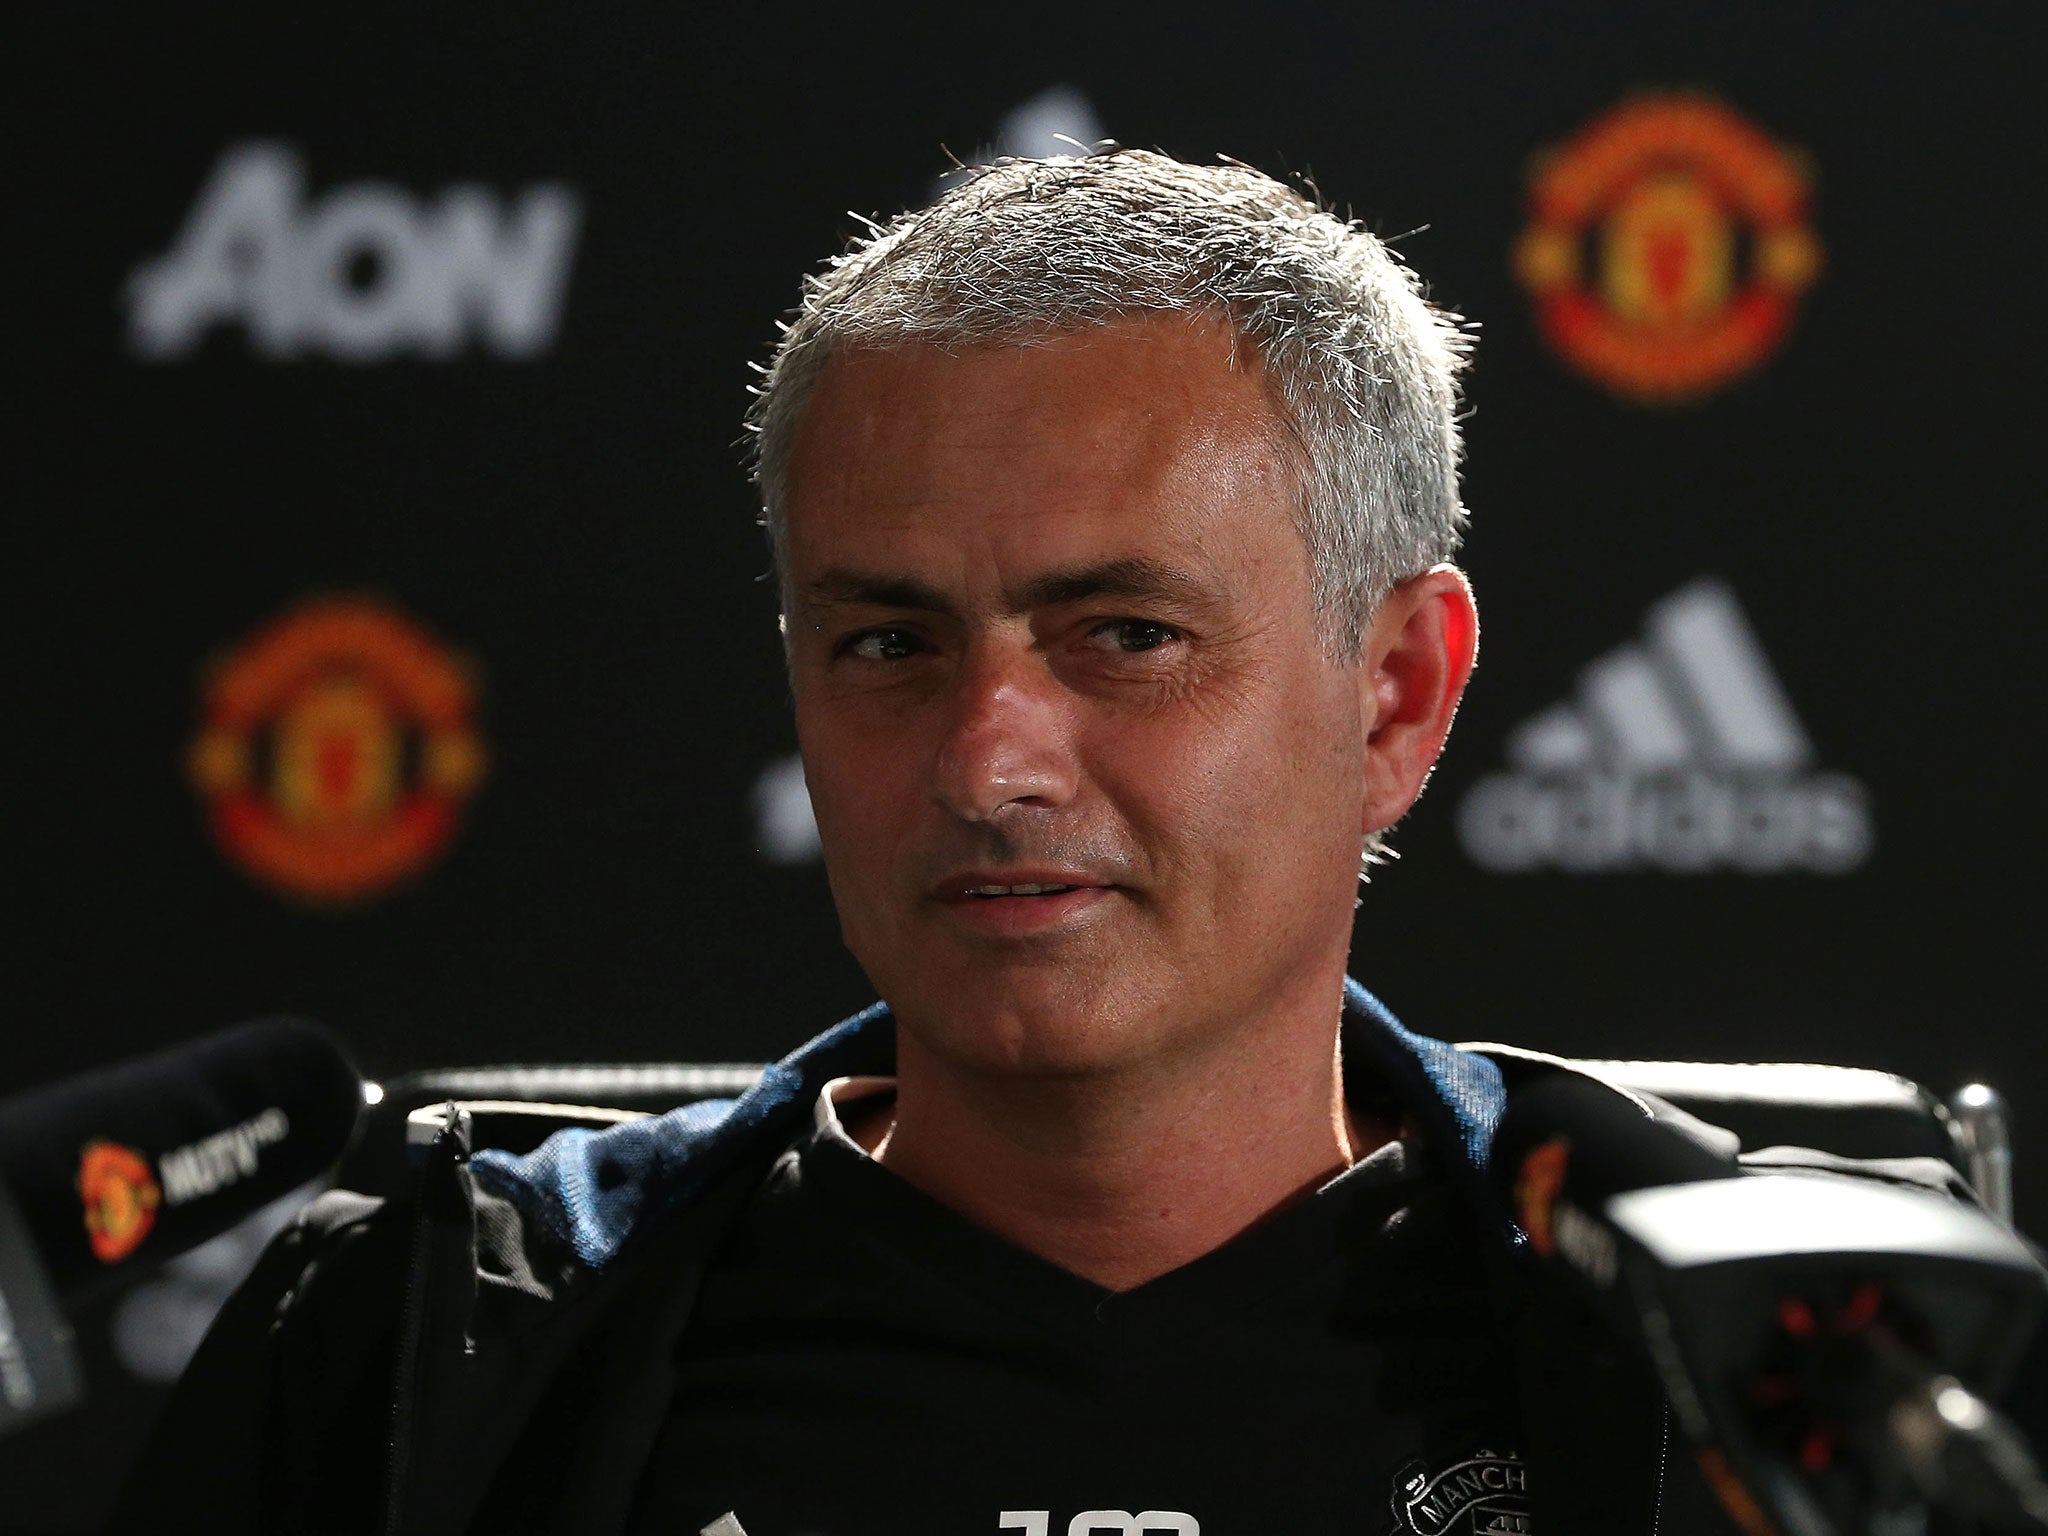 Jose Mourinho spoke on Friday ahead of his side's Premier League clash with current champions Leicester City